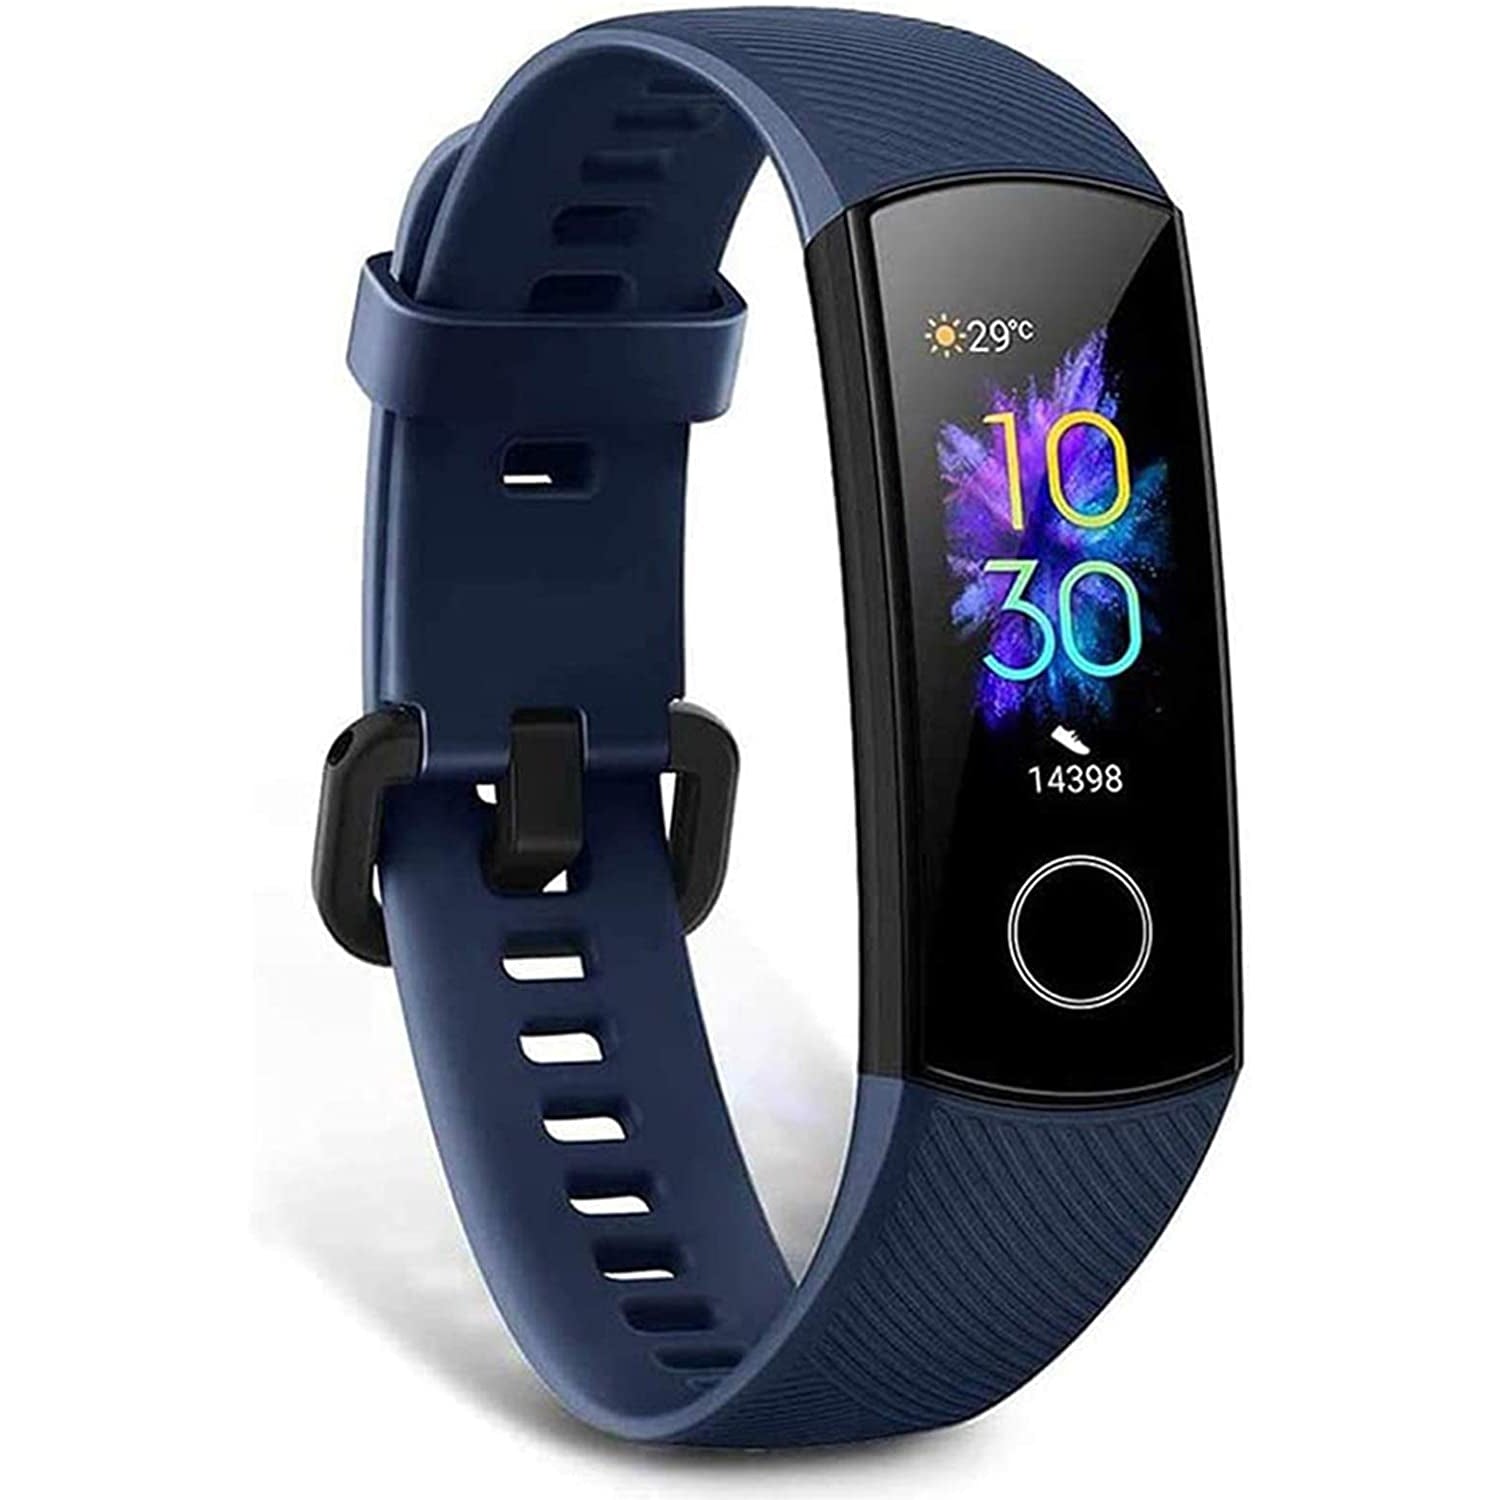 HONOR Band 5 Fitness Tracker with SpO2 Heart Rate and Sleep Monitor - Blue- Refurbished Excellent